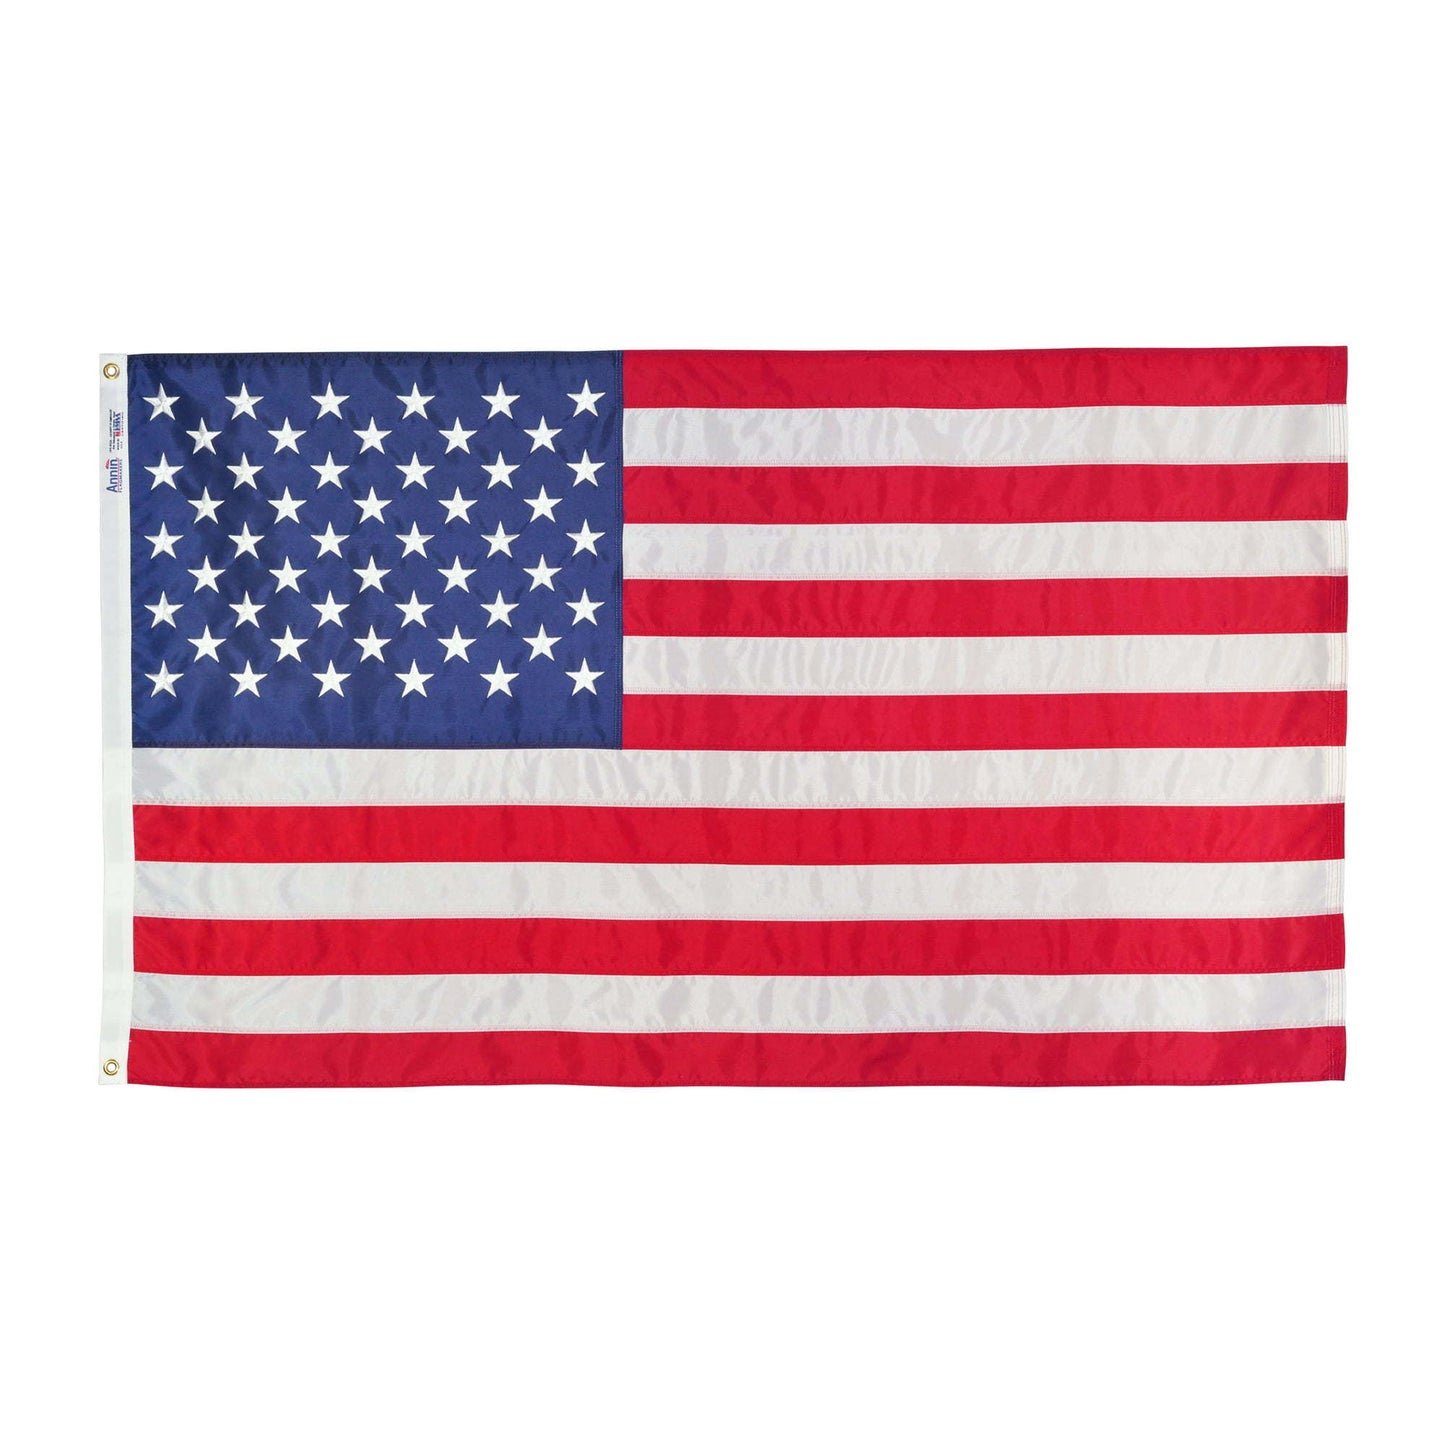 Stitched Stripes and Embroidered Stars USA Nylon Flag; 3' x 5'